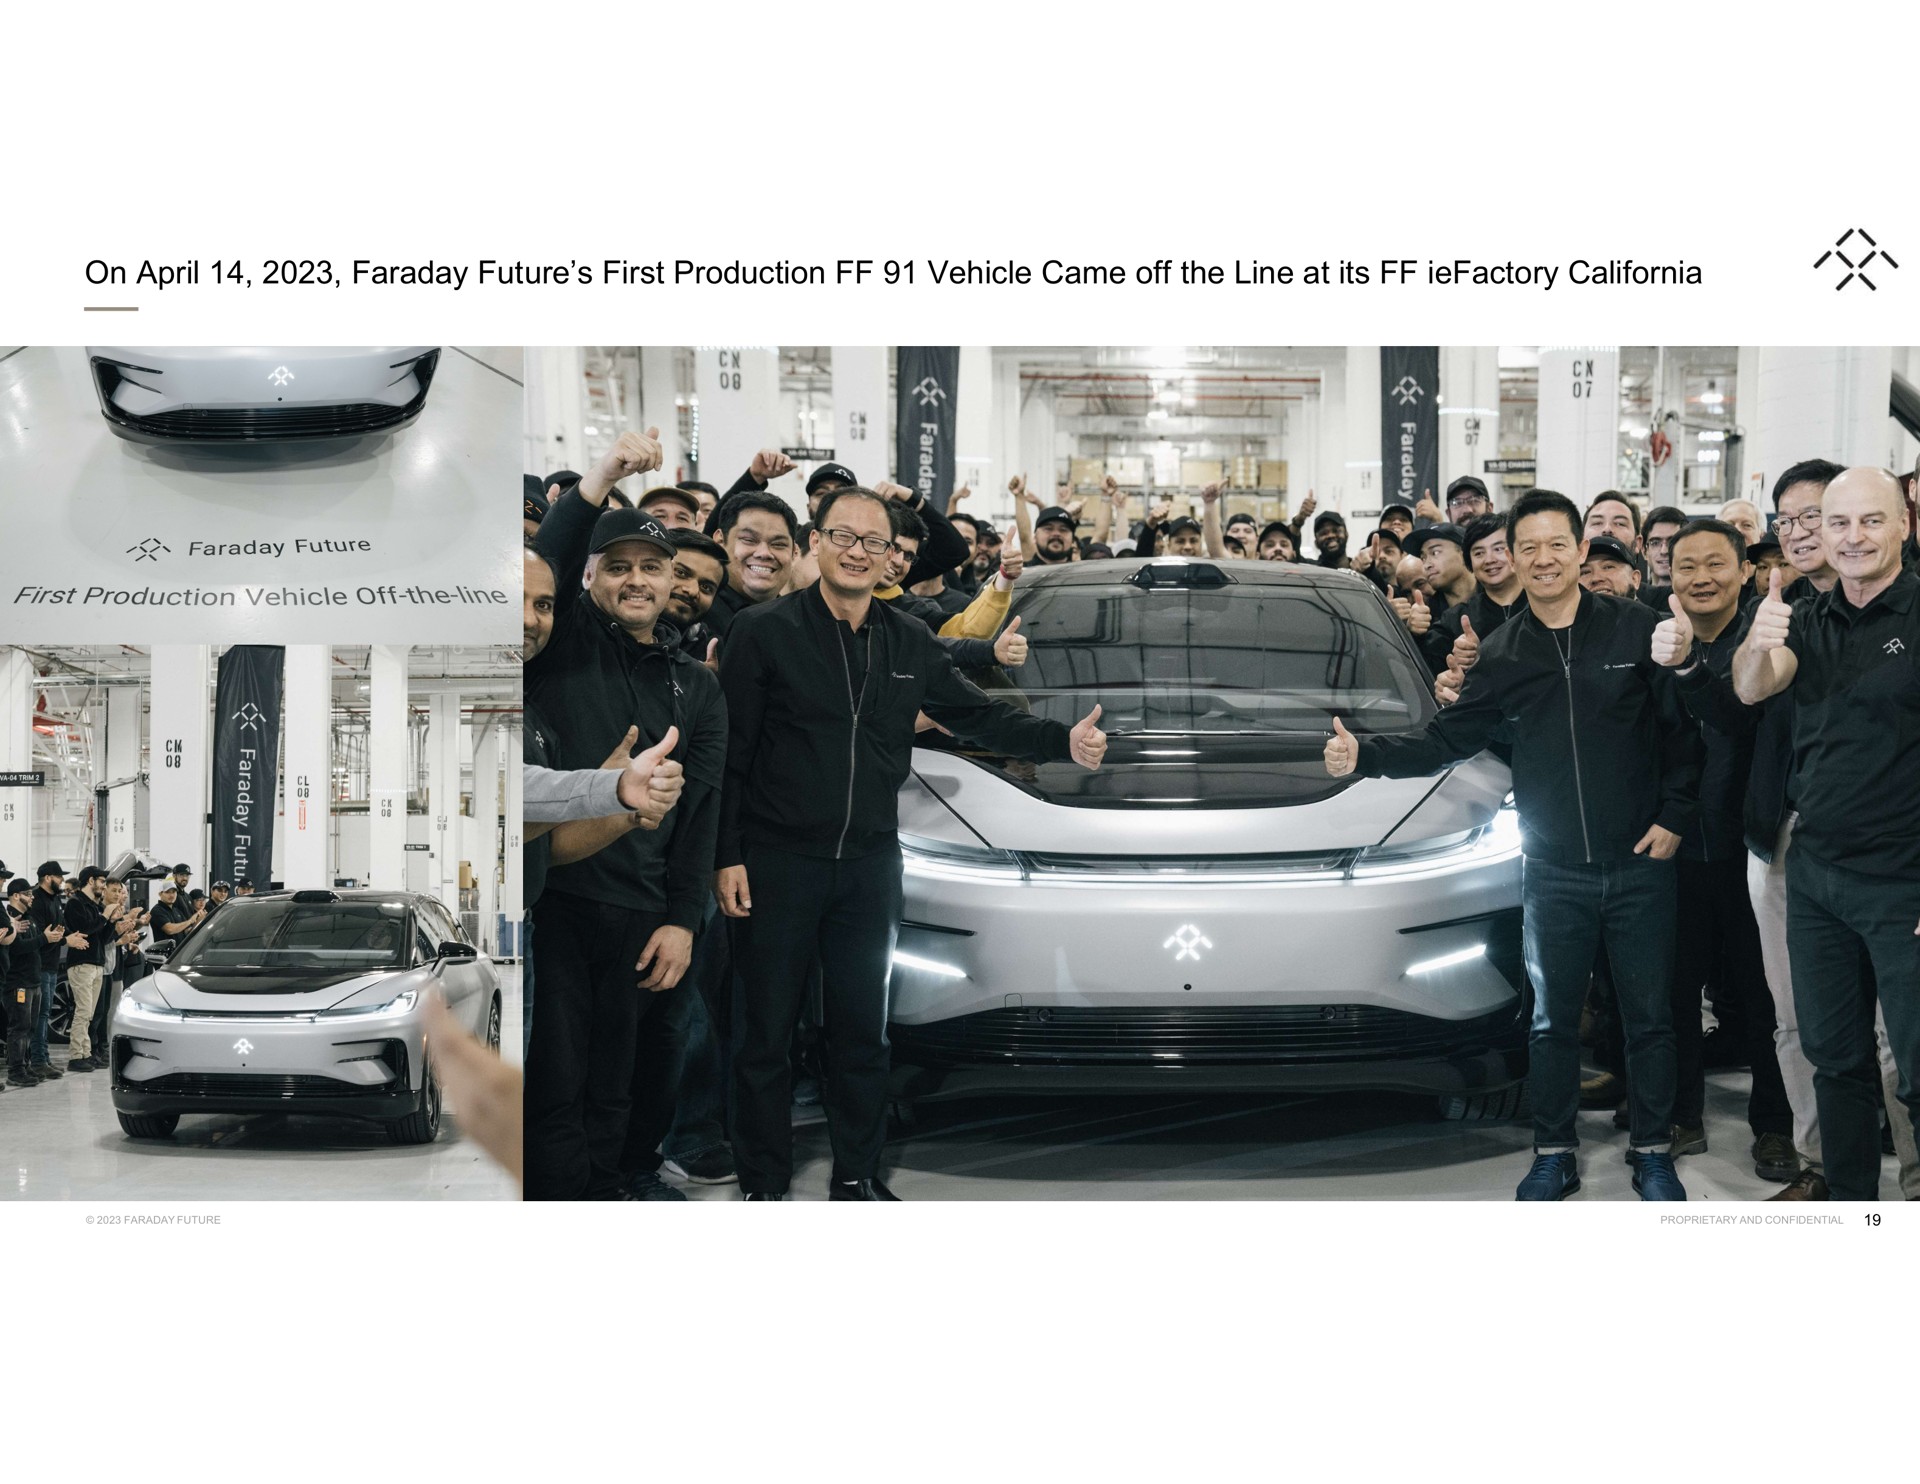 on faraday future first production vehicle came off the line at its fig i | Faraday Future